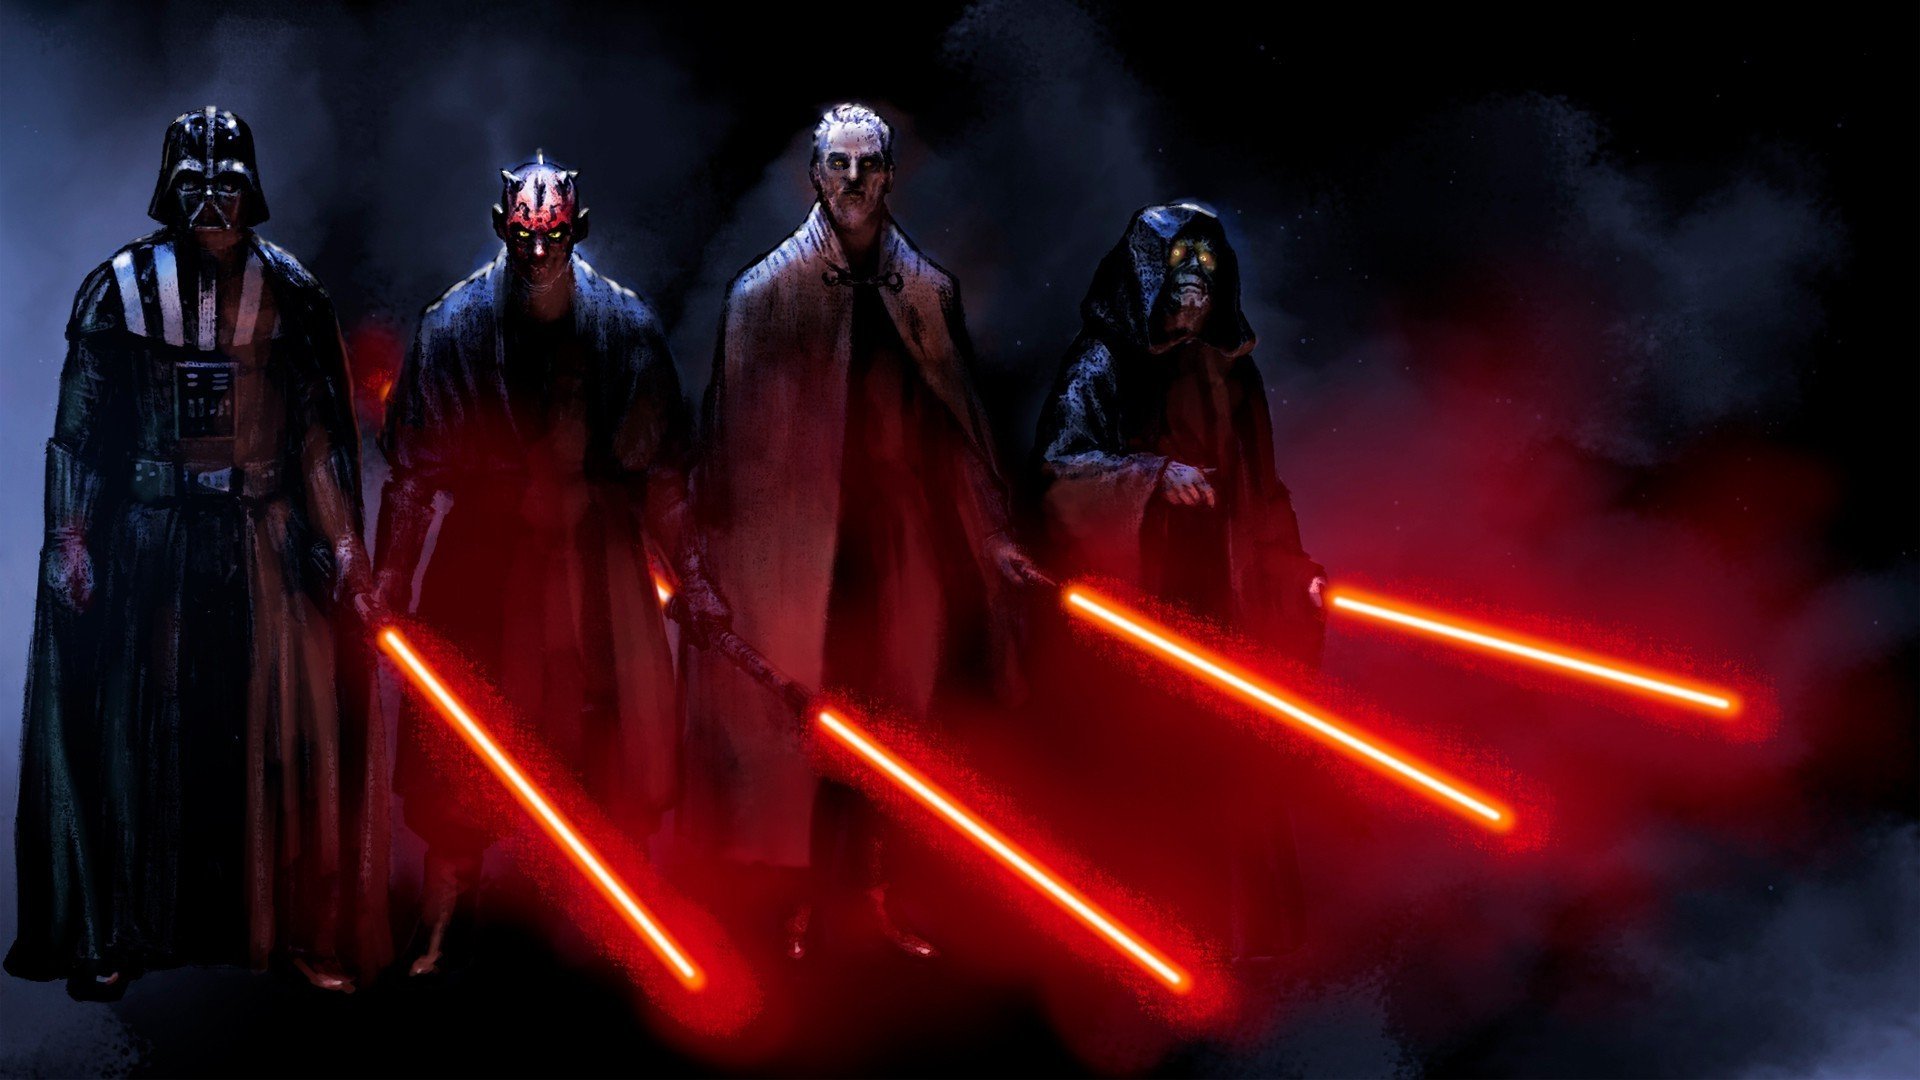 Free download Sith Star Wars HD Wallpaper 1920x1080 [1920x1080] for your Desktop, Mobile & Tablet. Explore Sith HD Wallpaper. Sith Symbol Wallpaper, Best Sith Wallpaper, Star Wars Sith Lords Wallpaper